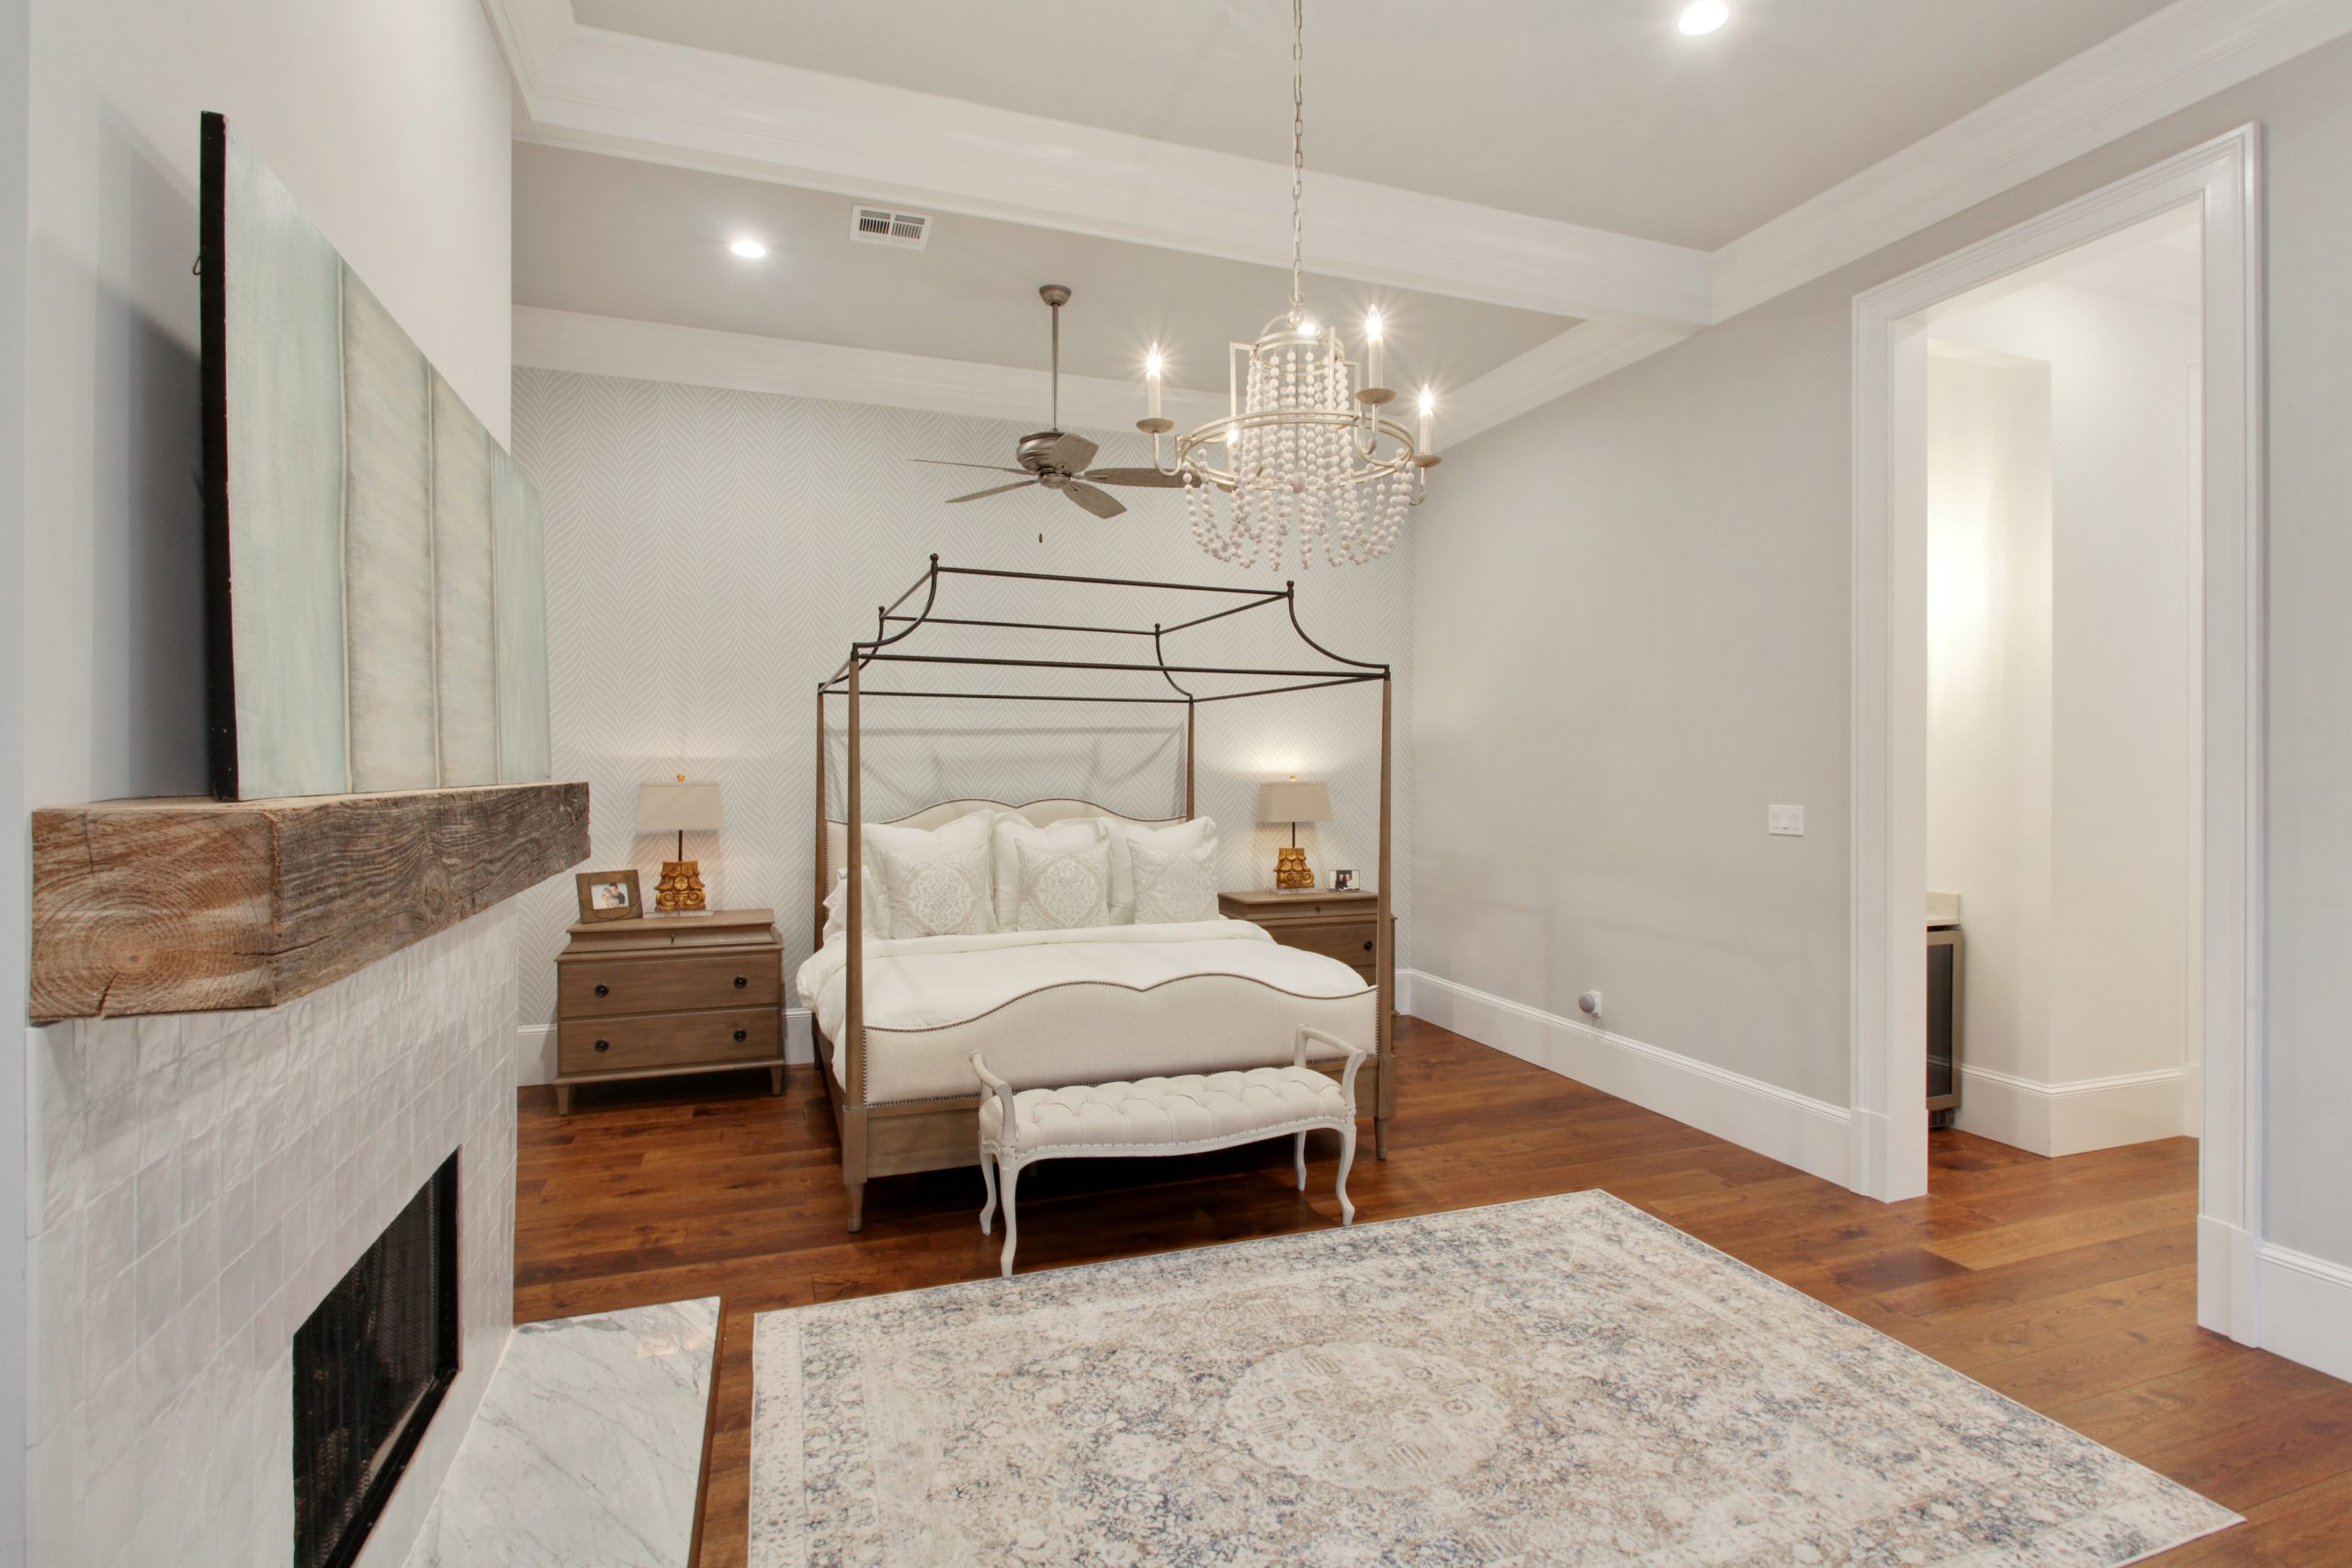 Primary Suite Bedroom of Audubon House luxury new construction custom home designed and built by DMG